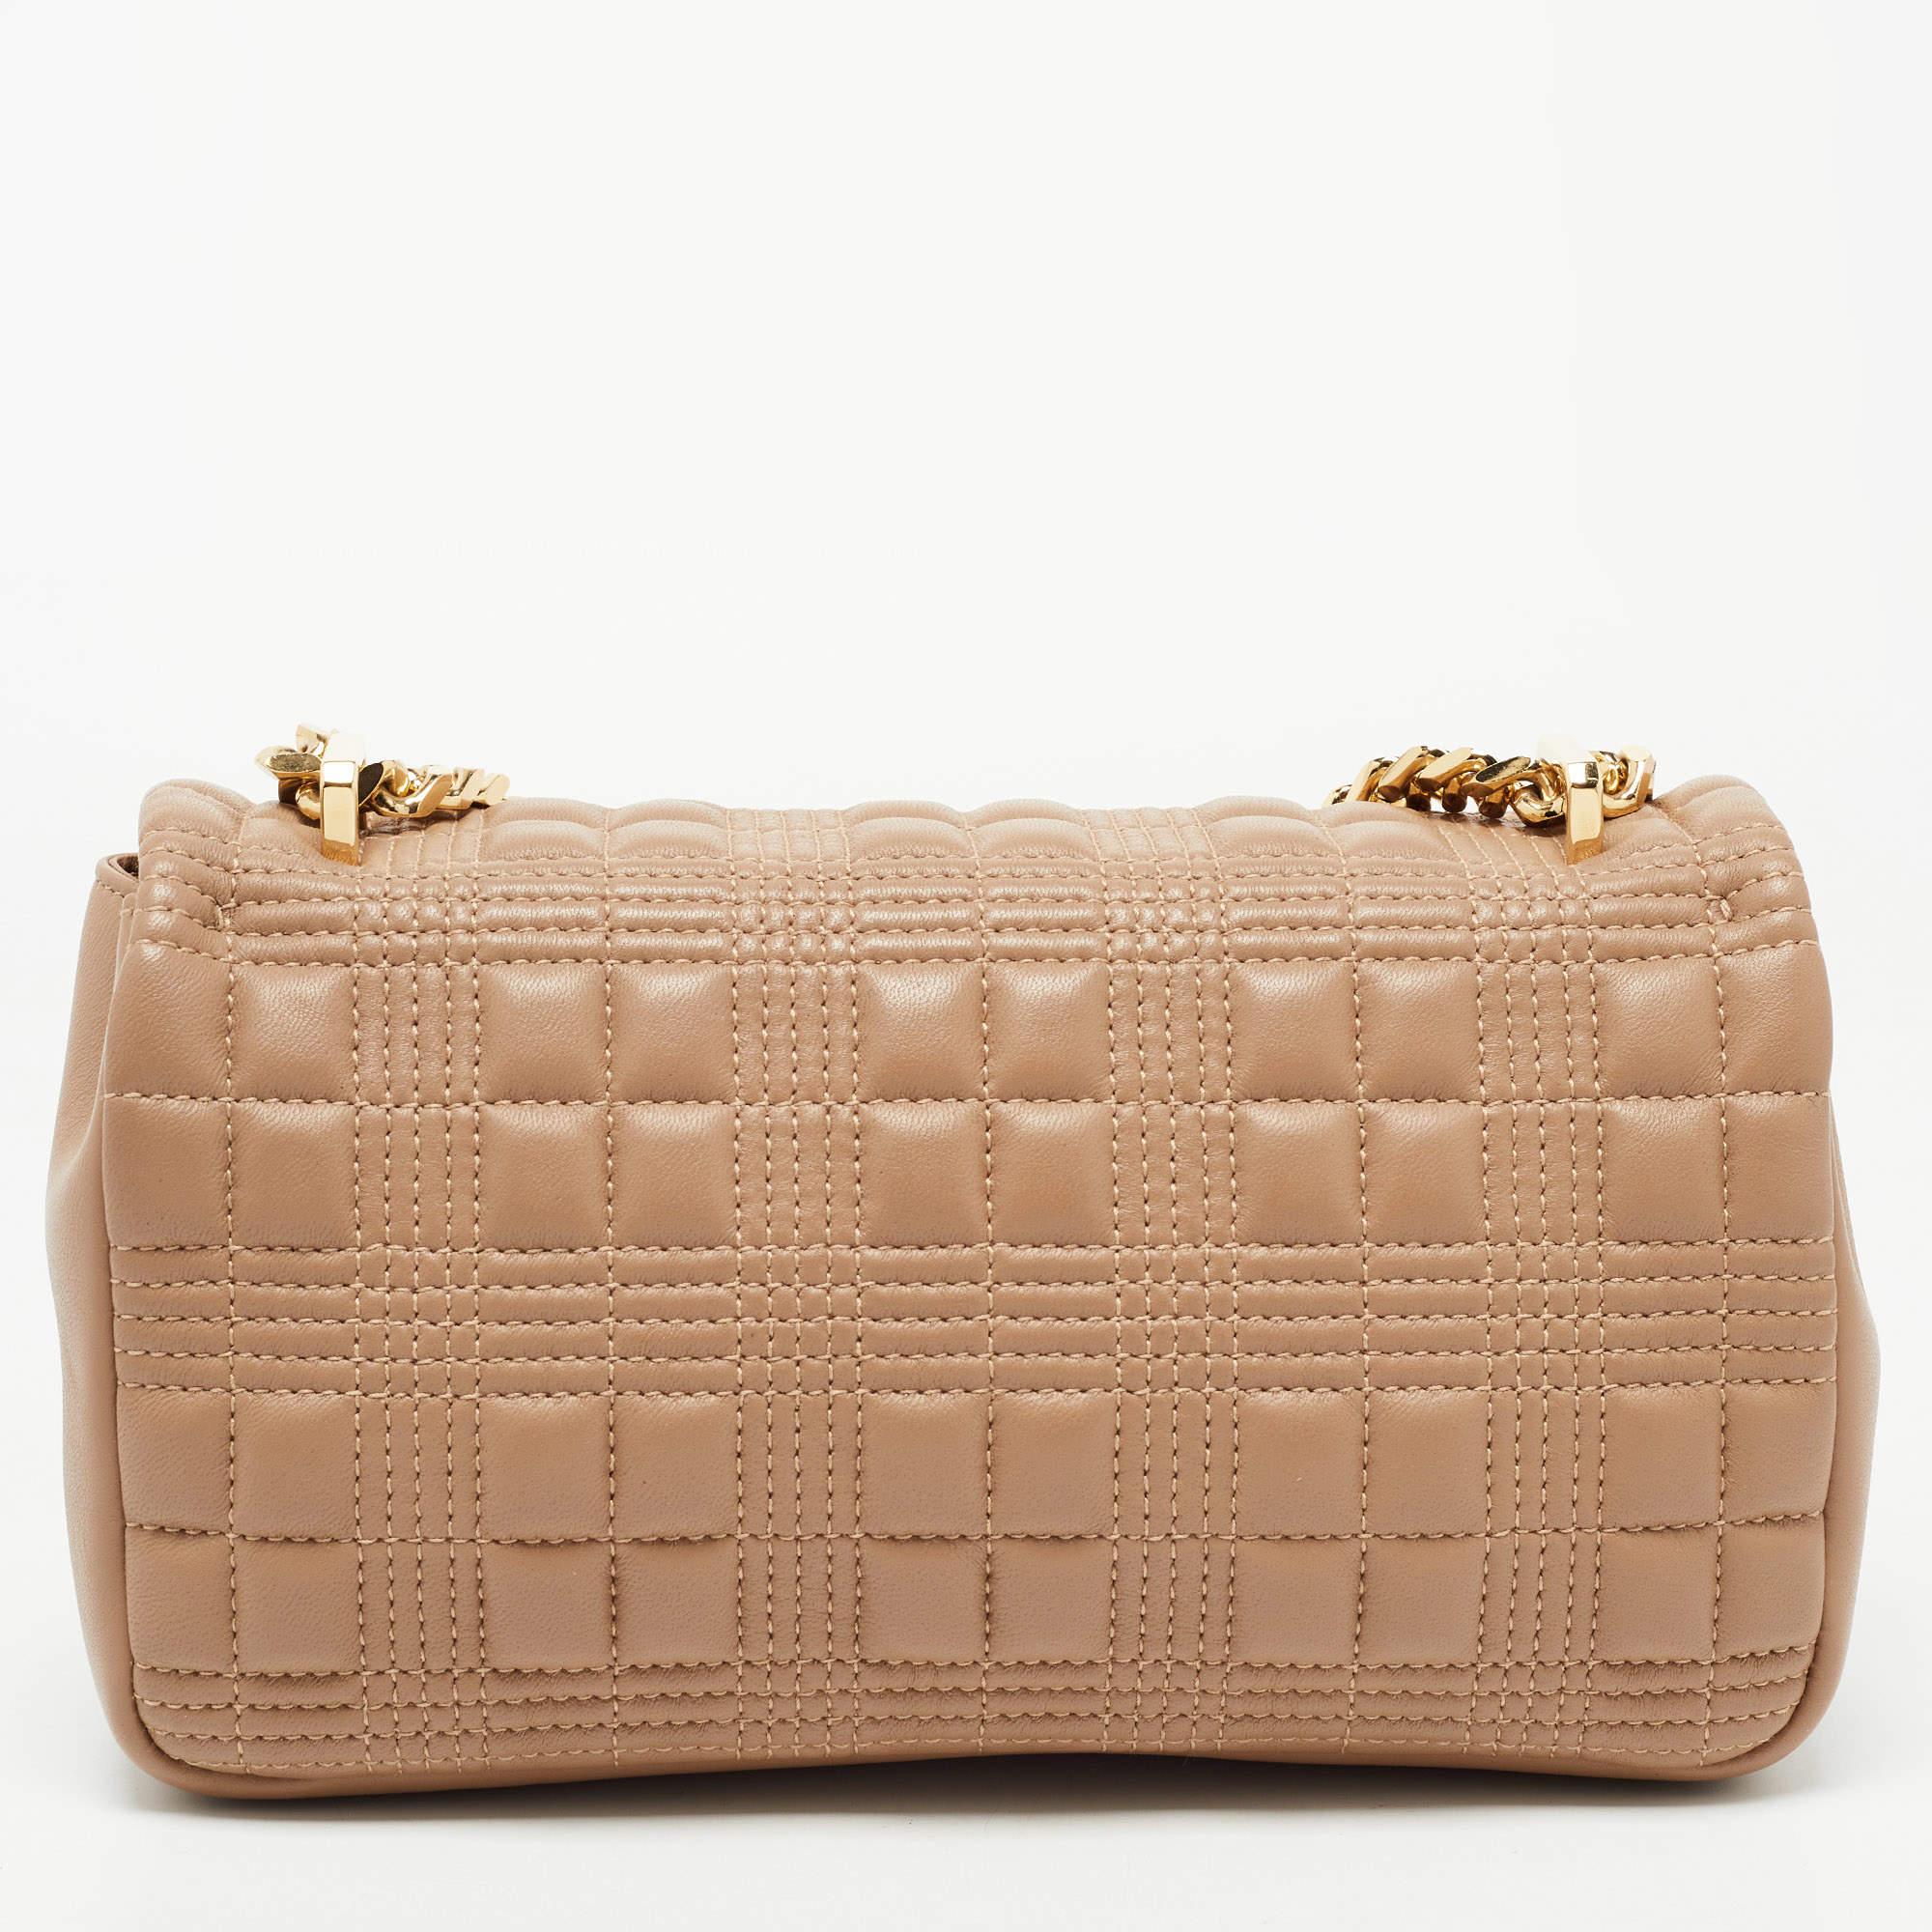 Recognized to add elements of elegance and high-end fashion into its pieces, this Lola shoulder bag from Burberry does complete justice to the brand's heritage and aesthetic. Externally, it is made using quilted leather with a gold-toned accent